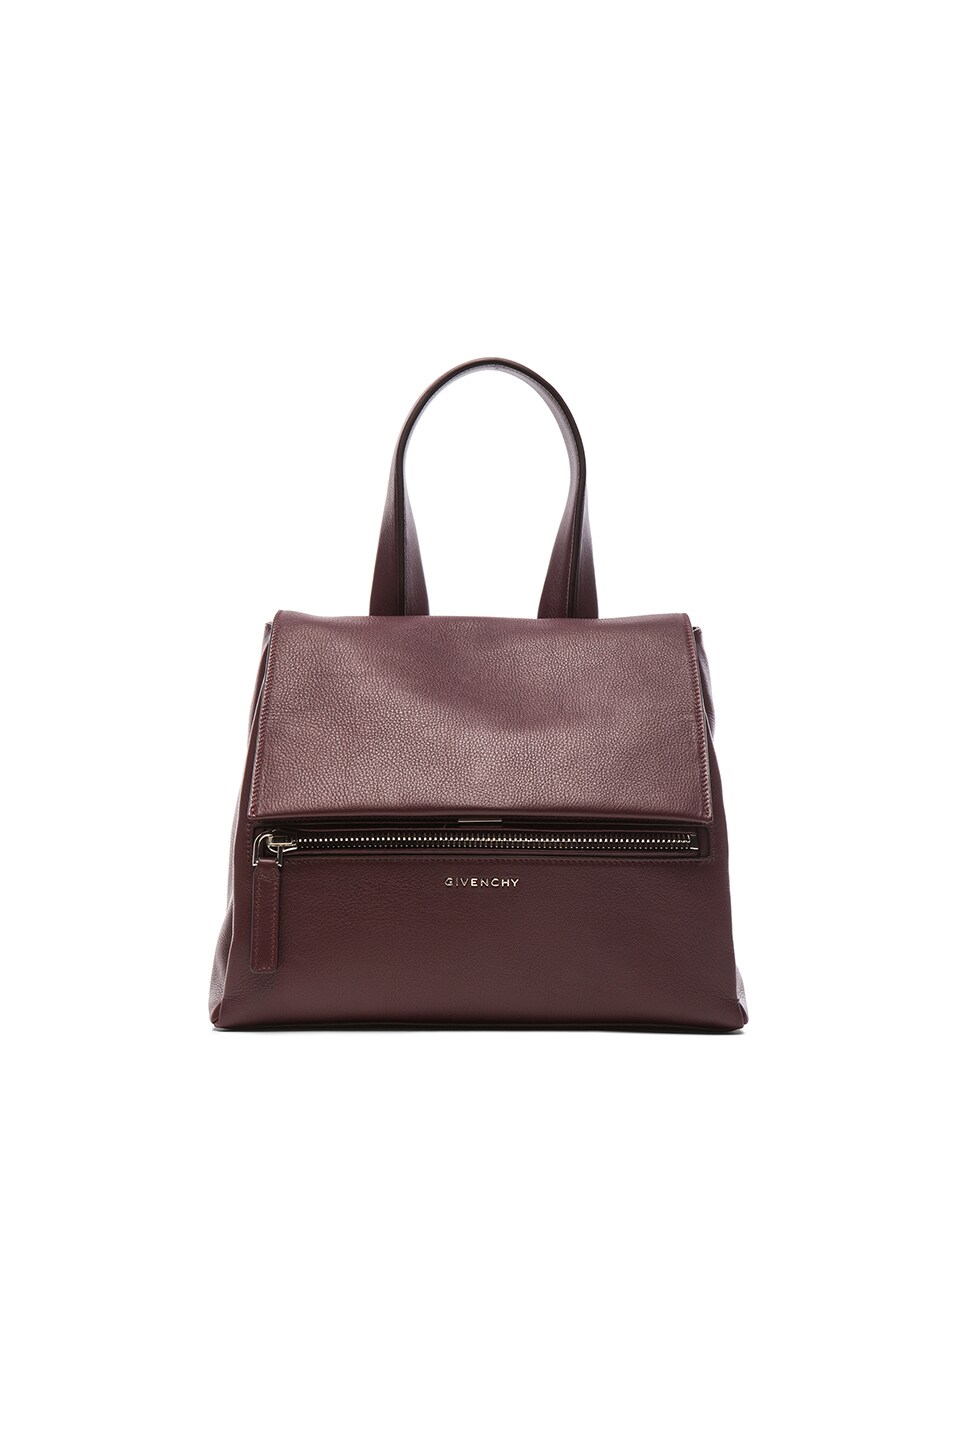 Image 1 of Givenchy Small Pandora Pure Flap Bag in Oxblood